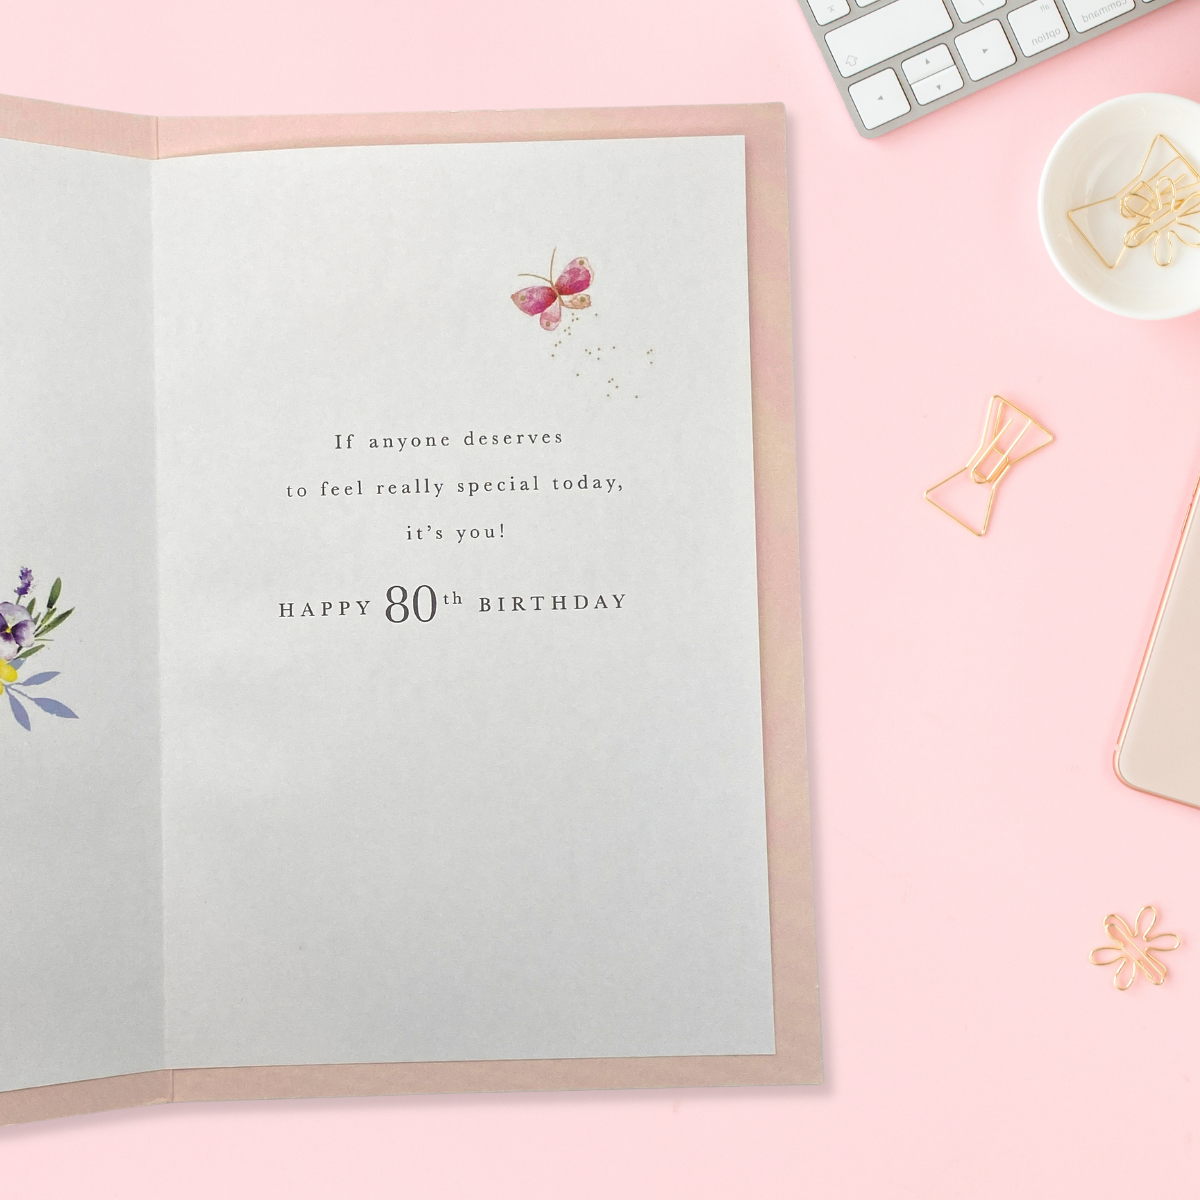 Inside image with pink card and printed colour insert with verse and butterfly